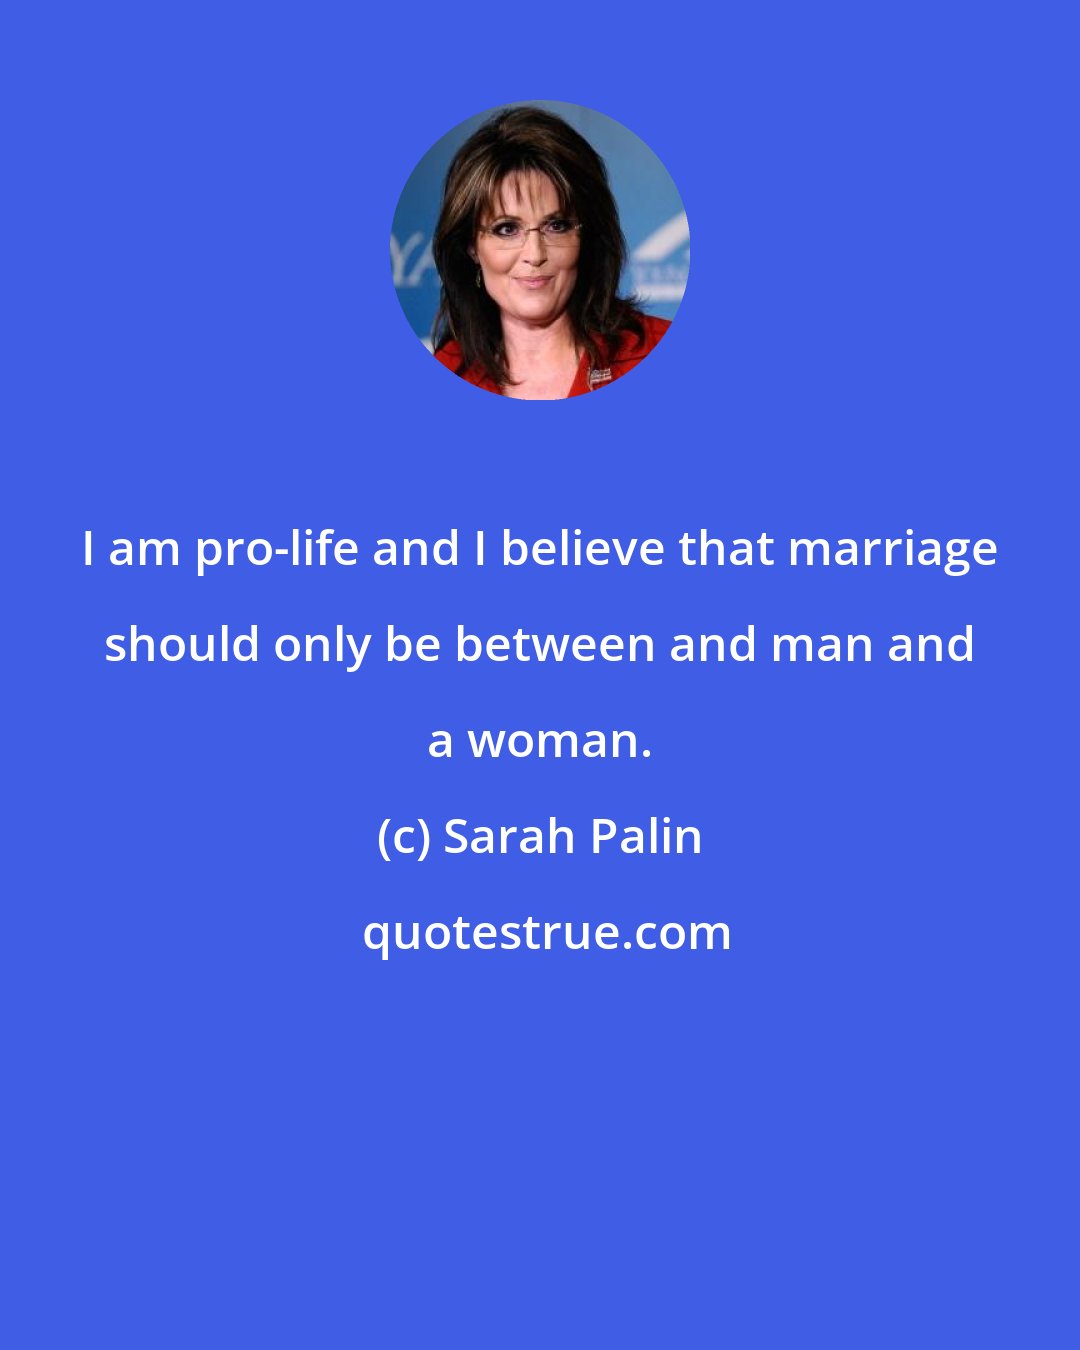 Sarah Palin: I am pro-life and I believe that marriage should only be between and man and a woman.